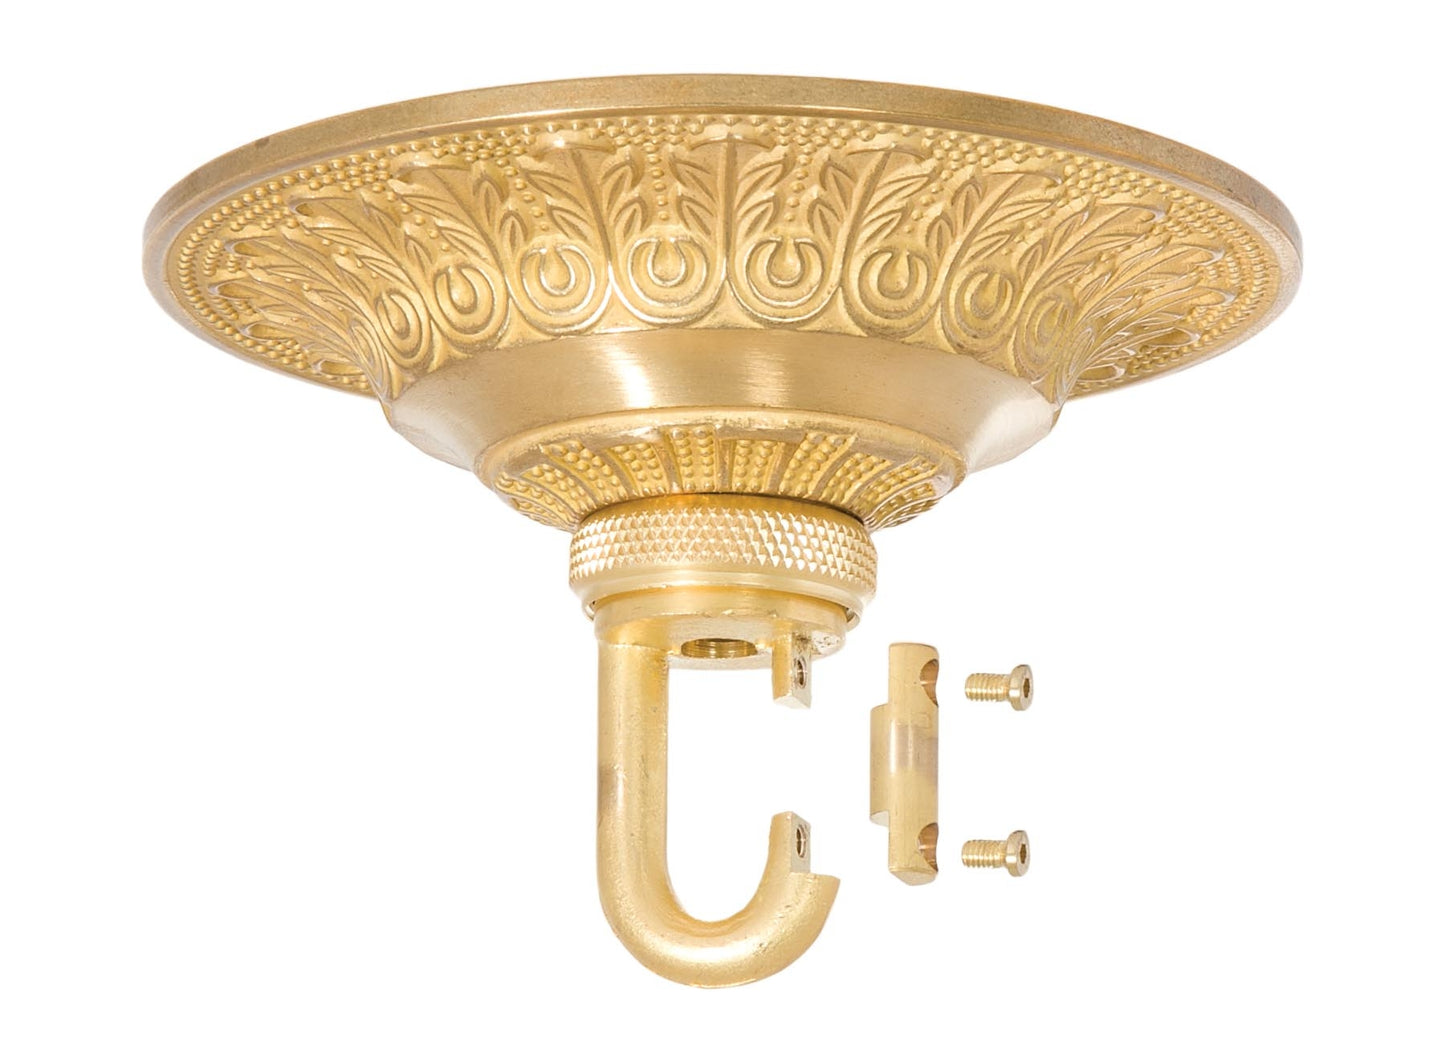 6 Inch Diameter Unfinished Die Cast Brass Canopy w/ Heavy Duty Loop and Hardware Kit